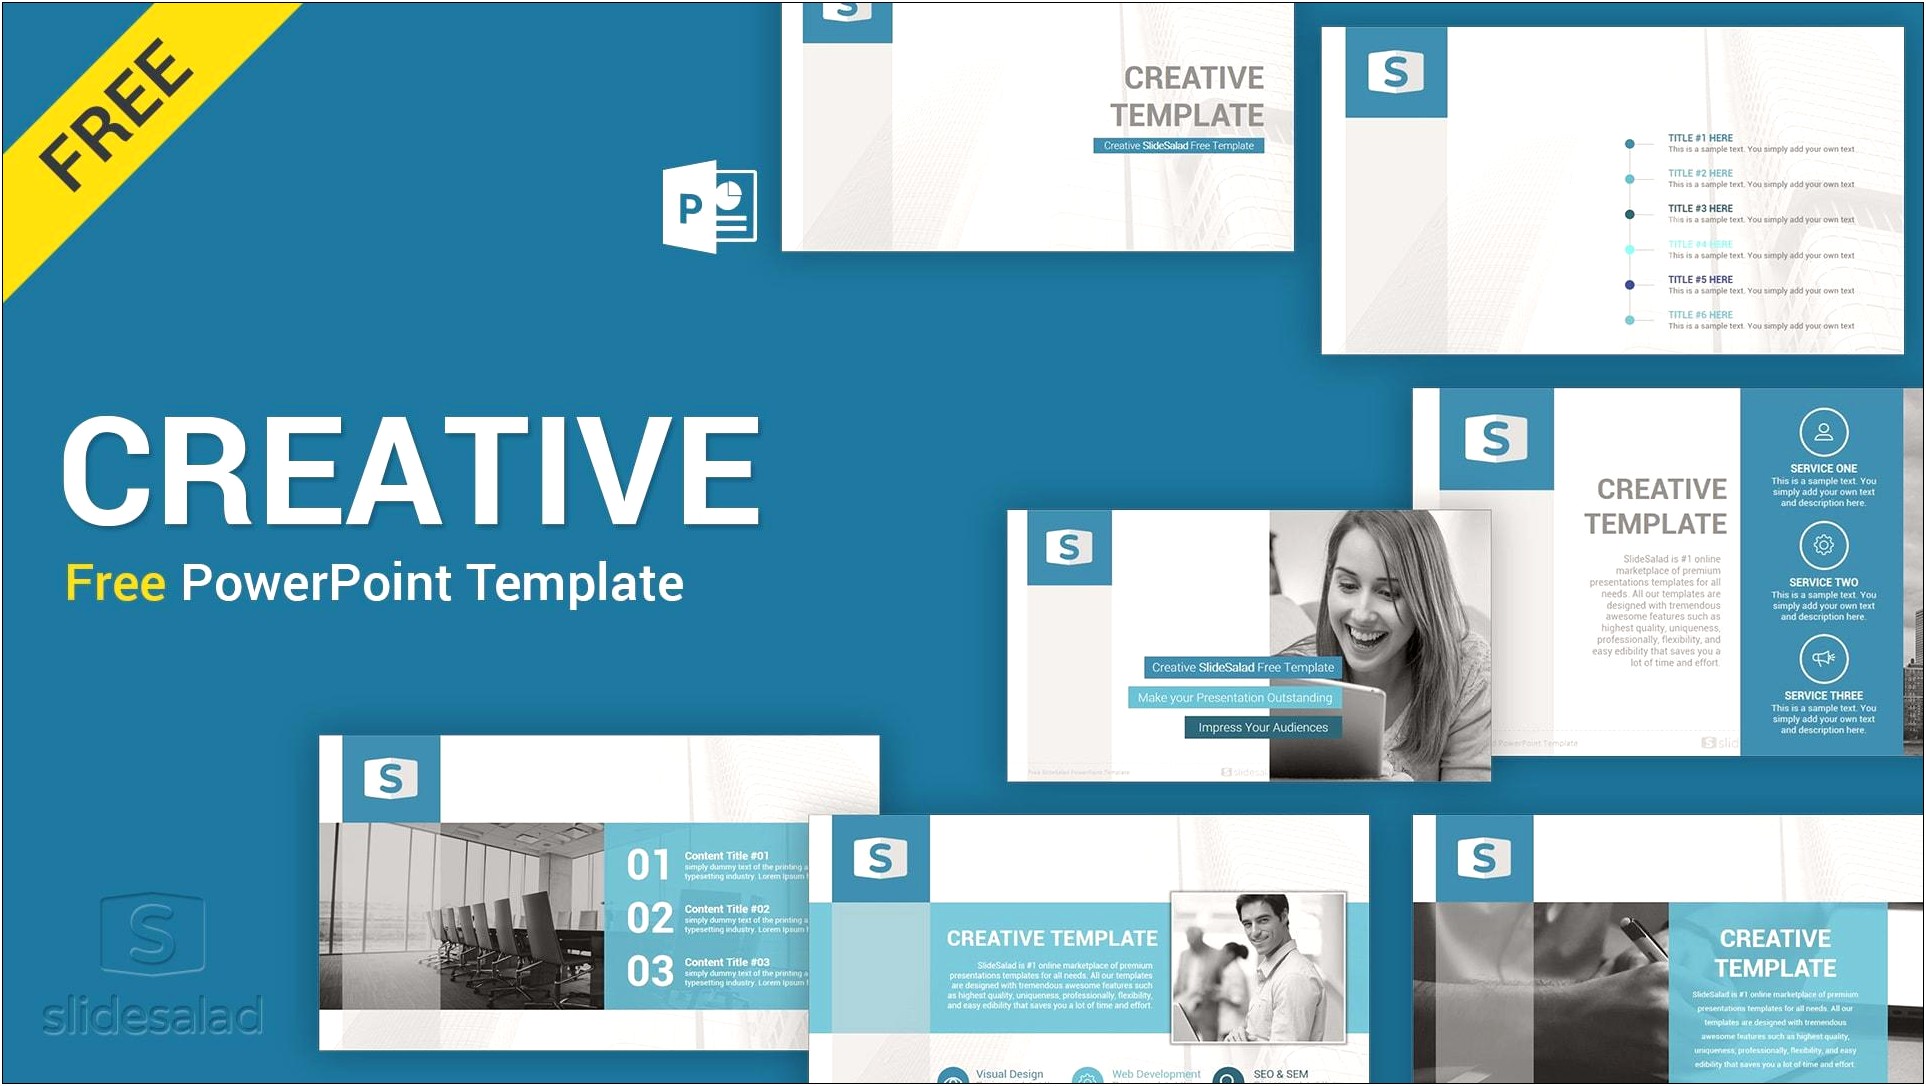 Microsoft Powerpoint Free Template Designs Download